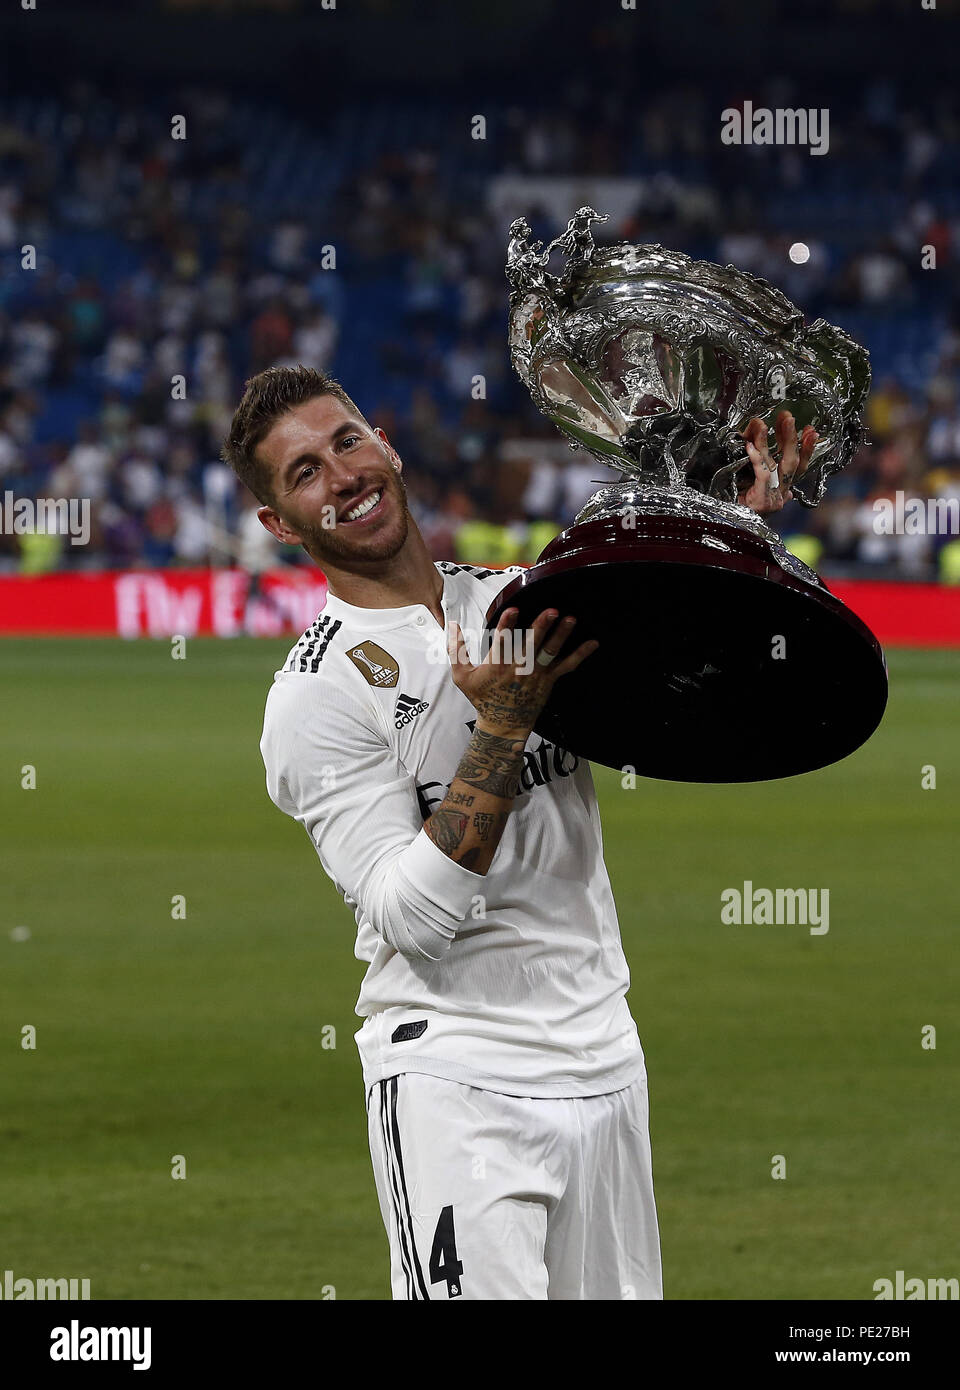 Madrid, Madrid, Spain. 11th Aug, 2018. Captain of Real Madrid Sergio Ramos stand the Santiago Bernabéu Trophy after winning the friendly match between Real Madrid CF and AC Milan at Estadio Santiago Bernabeu. Credit: Manu Reino/SOPA Images/ZUMA Wire/Alamy Live News Stock Photo